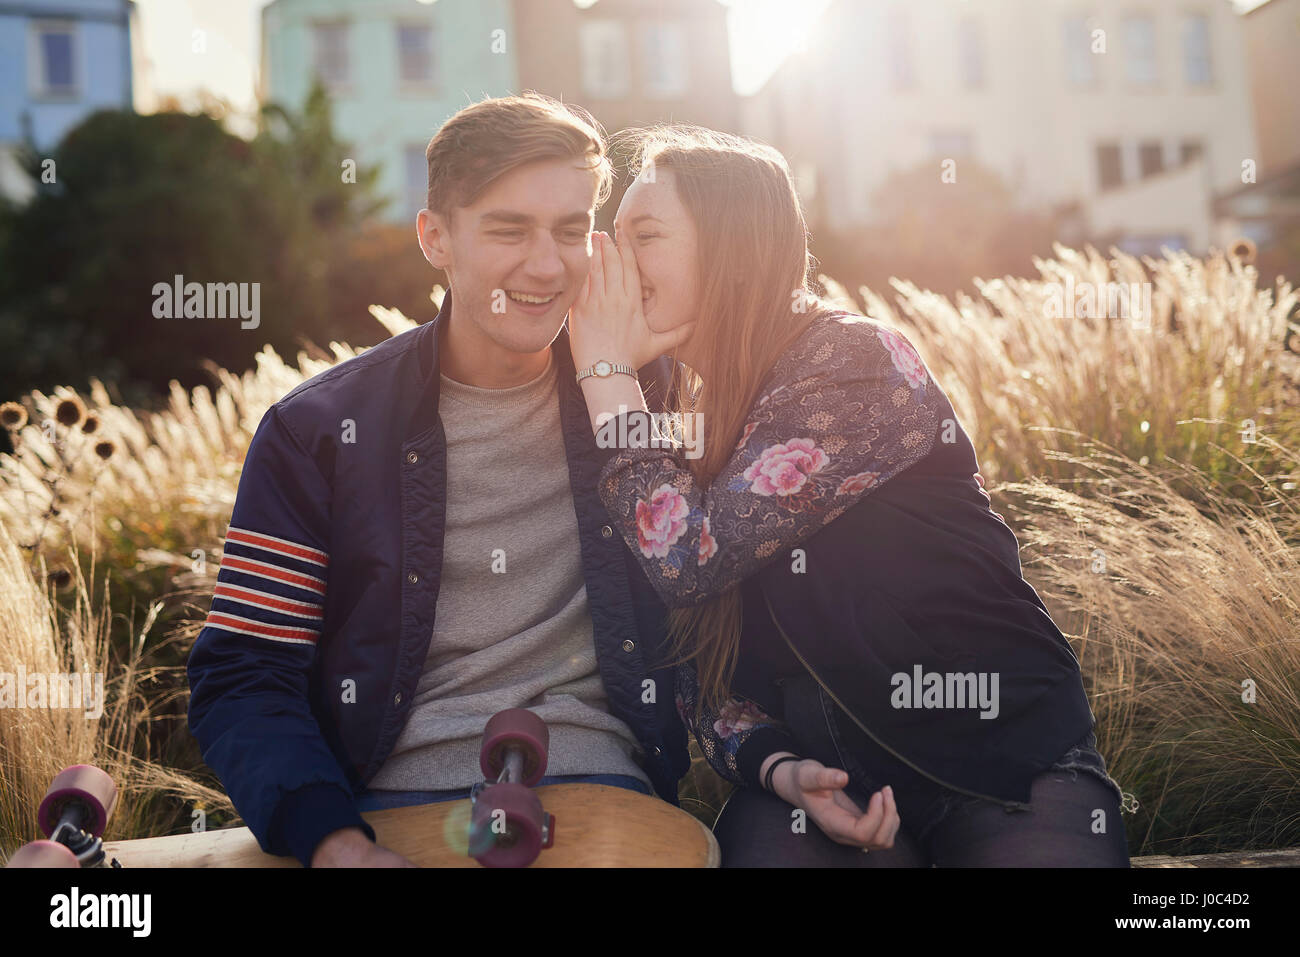 Two friends sitting outdoors, young woman whispering to young man, Bristol, UK Stock Photo